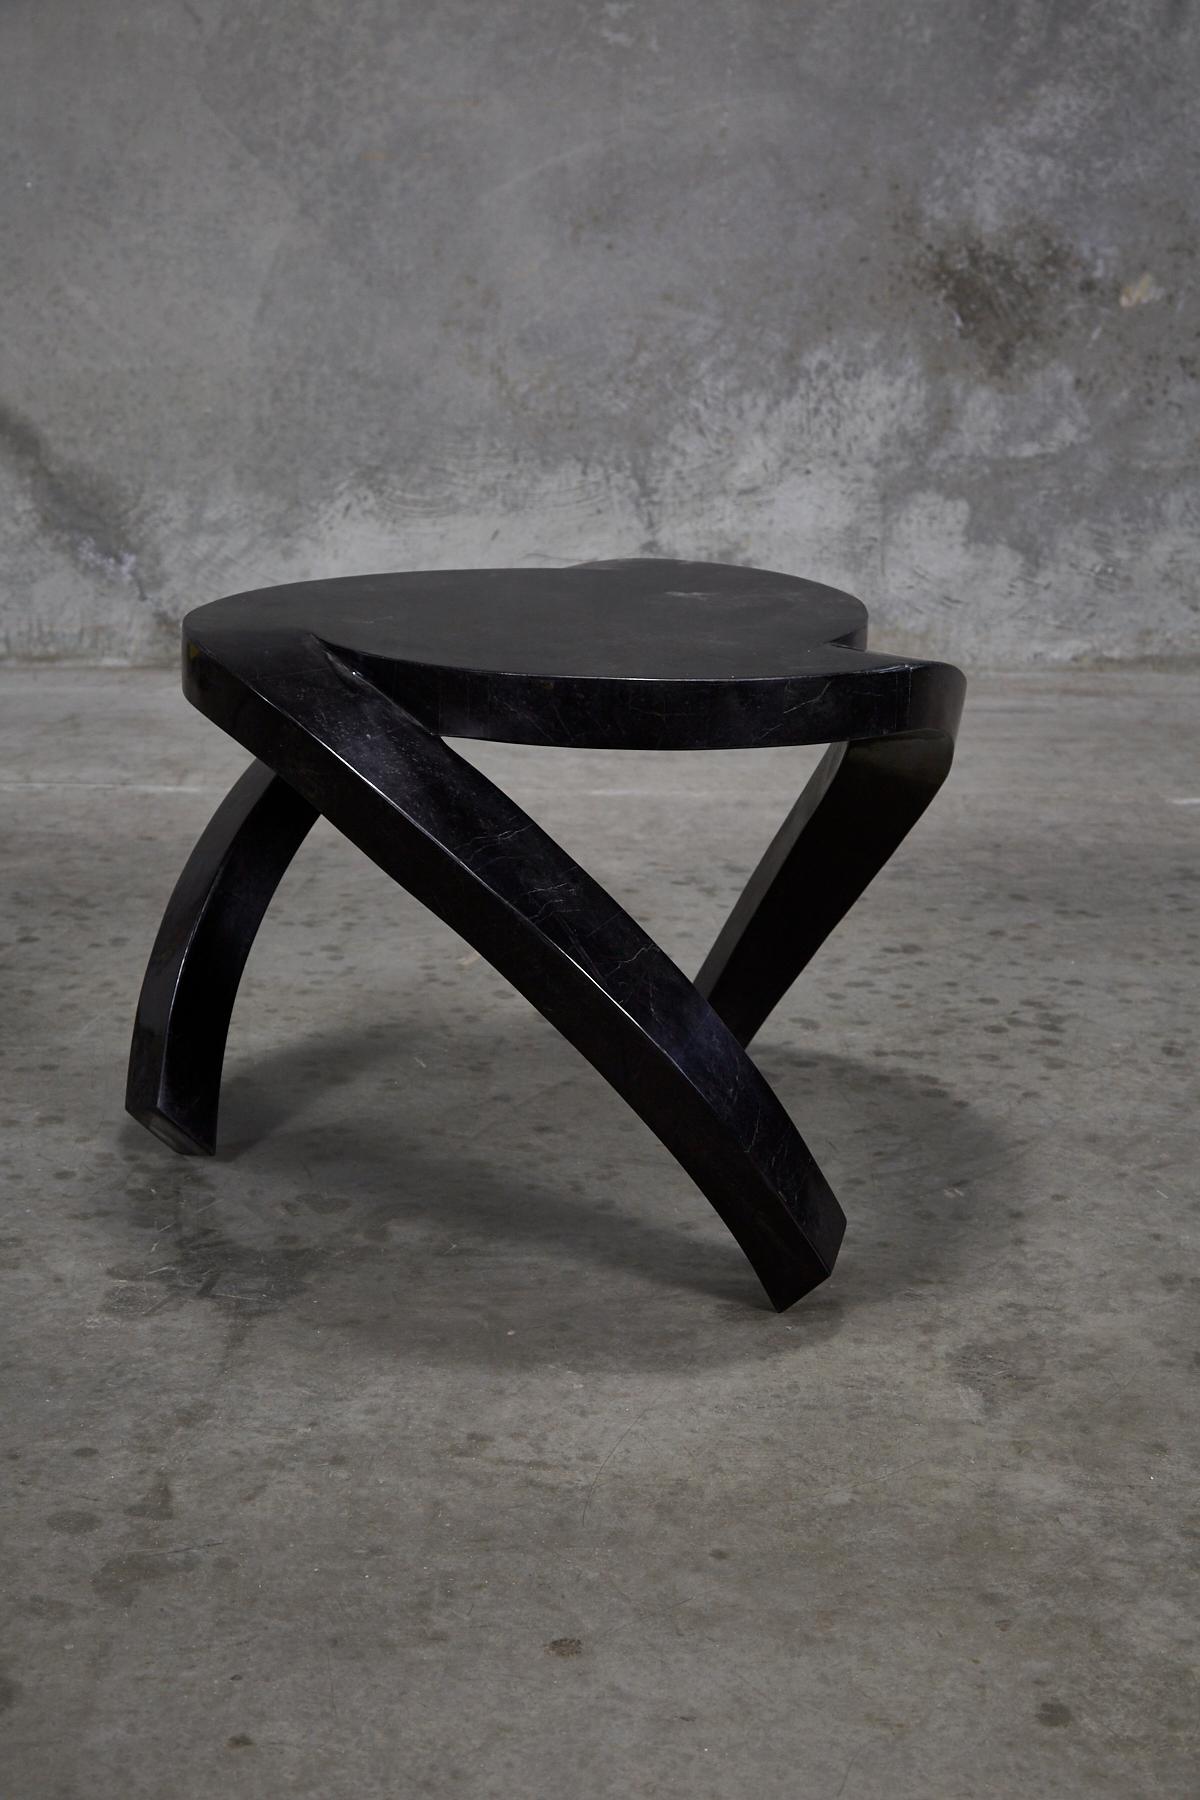 Dynamic side table completely hand-inlaid with black Cantor stone over fiberglass and wooden body. All natural stone with no lacquer or additional finish.

Coordinating cocktail table also available, item no. LU1484213918652.

All furnishings are